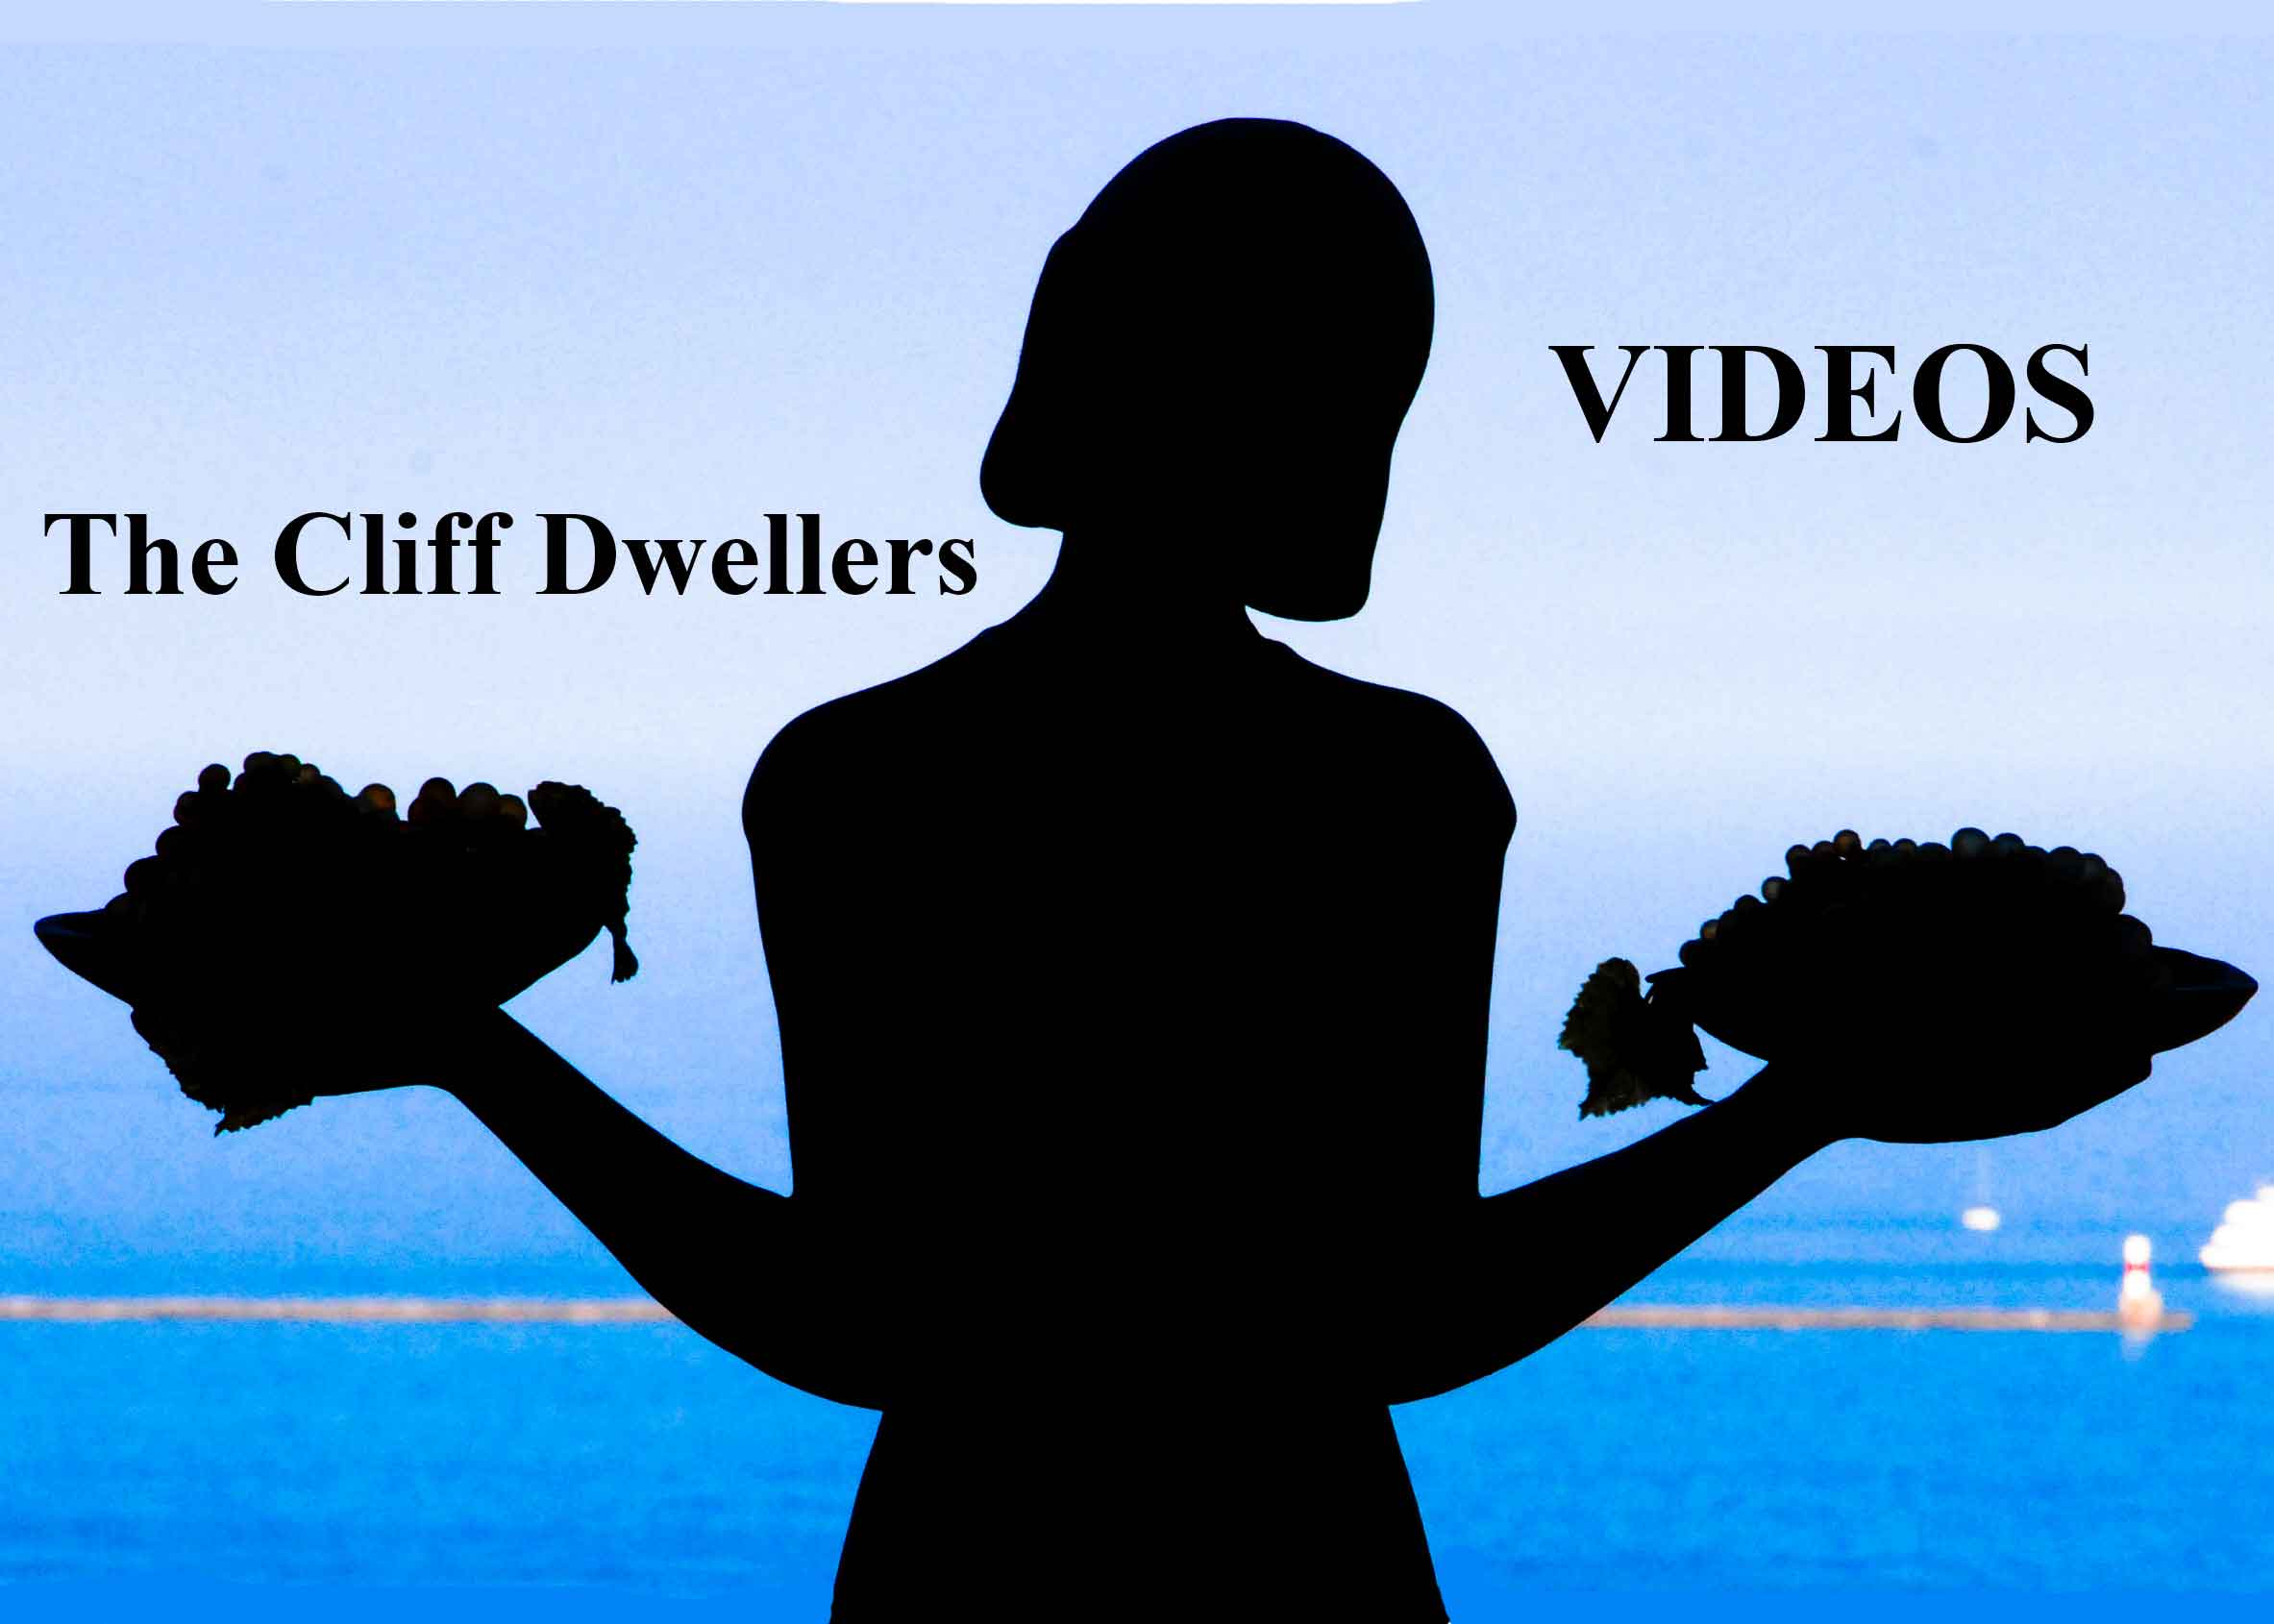 The Cliff Dwellers VIDEOS